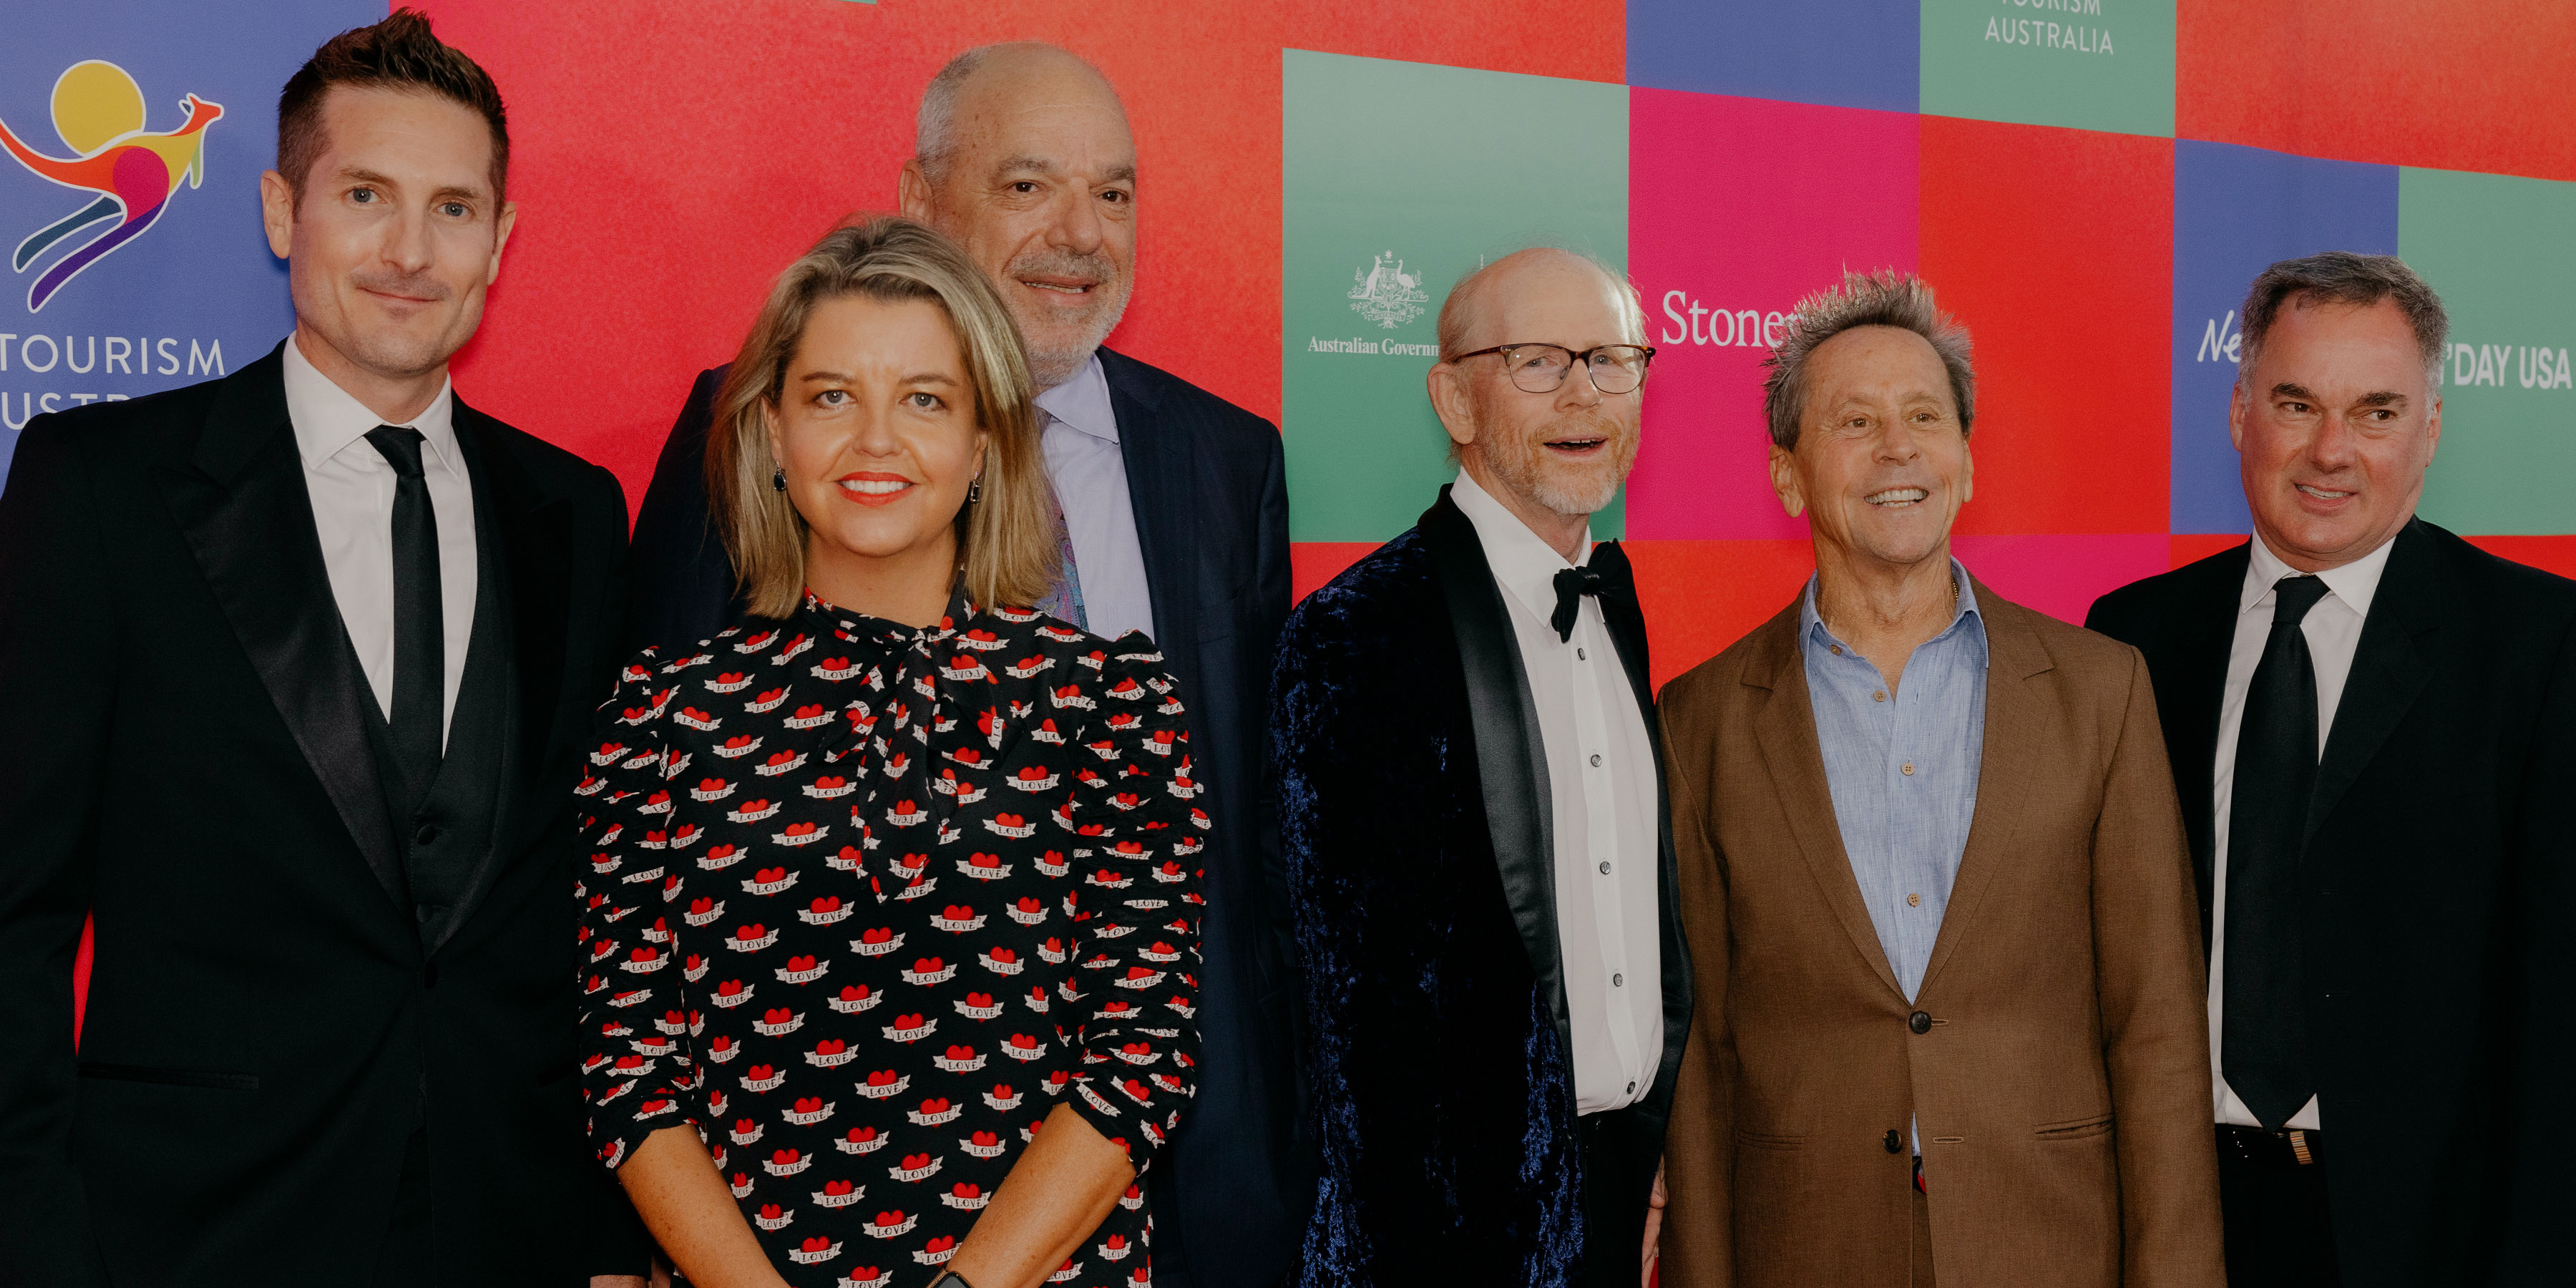 Gold Diggers fires up production in Victoria  ScreenHub Australia - Film &  Television Jobs, News, Reviews & Screen Industry Data